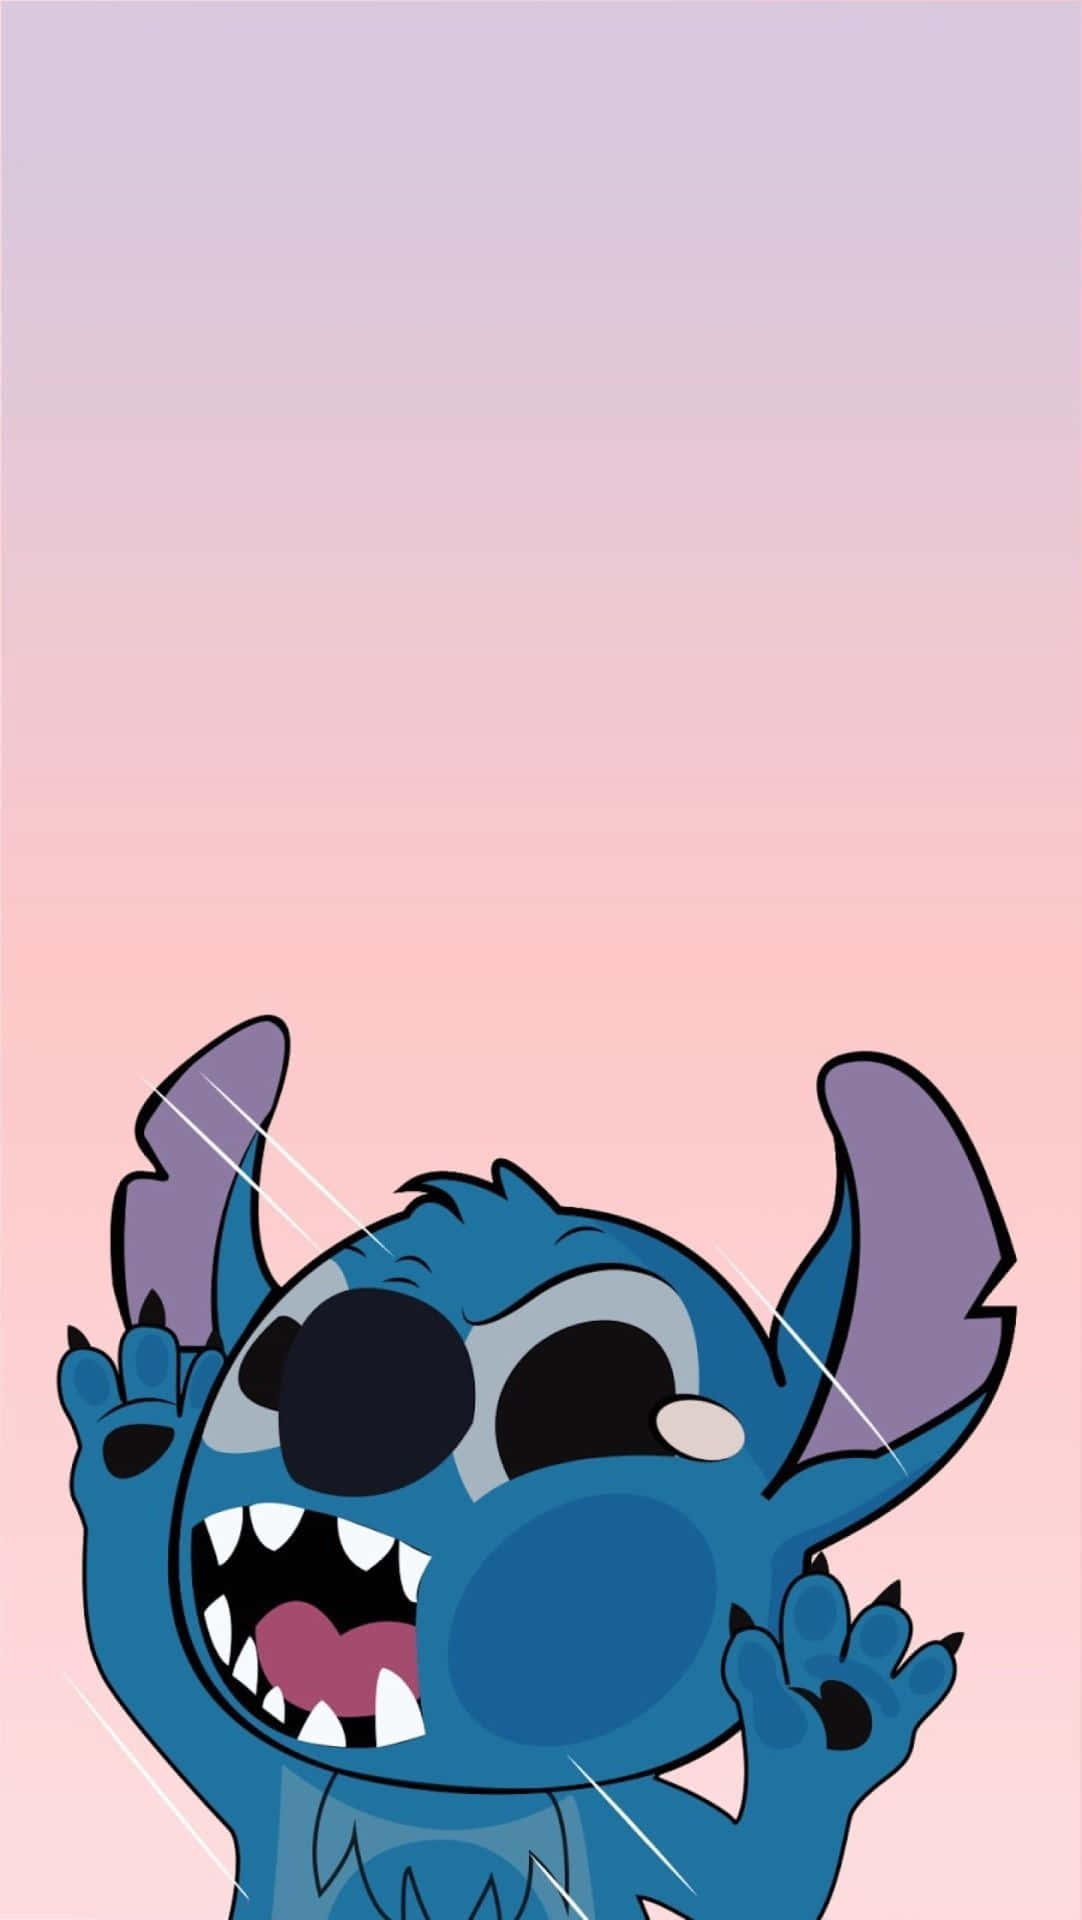 Stitch, the beloved character from Disney's Lilo and Stitch, in all his Aesthetic Glory. Wallpaper